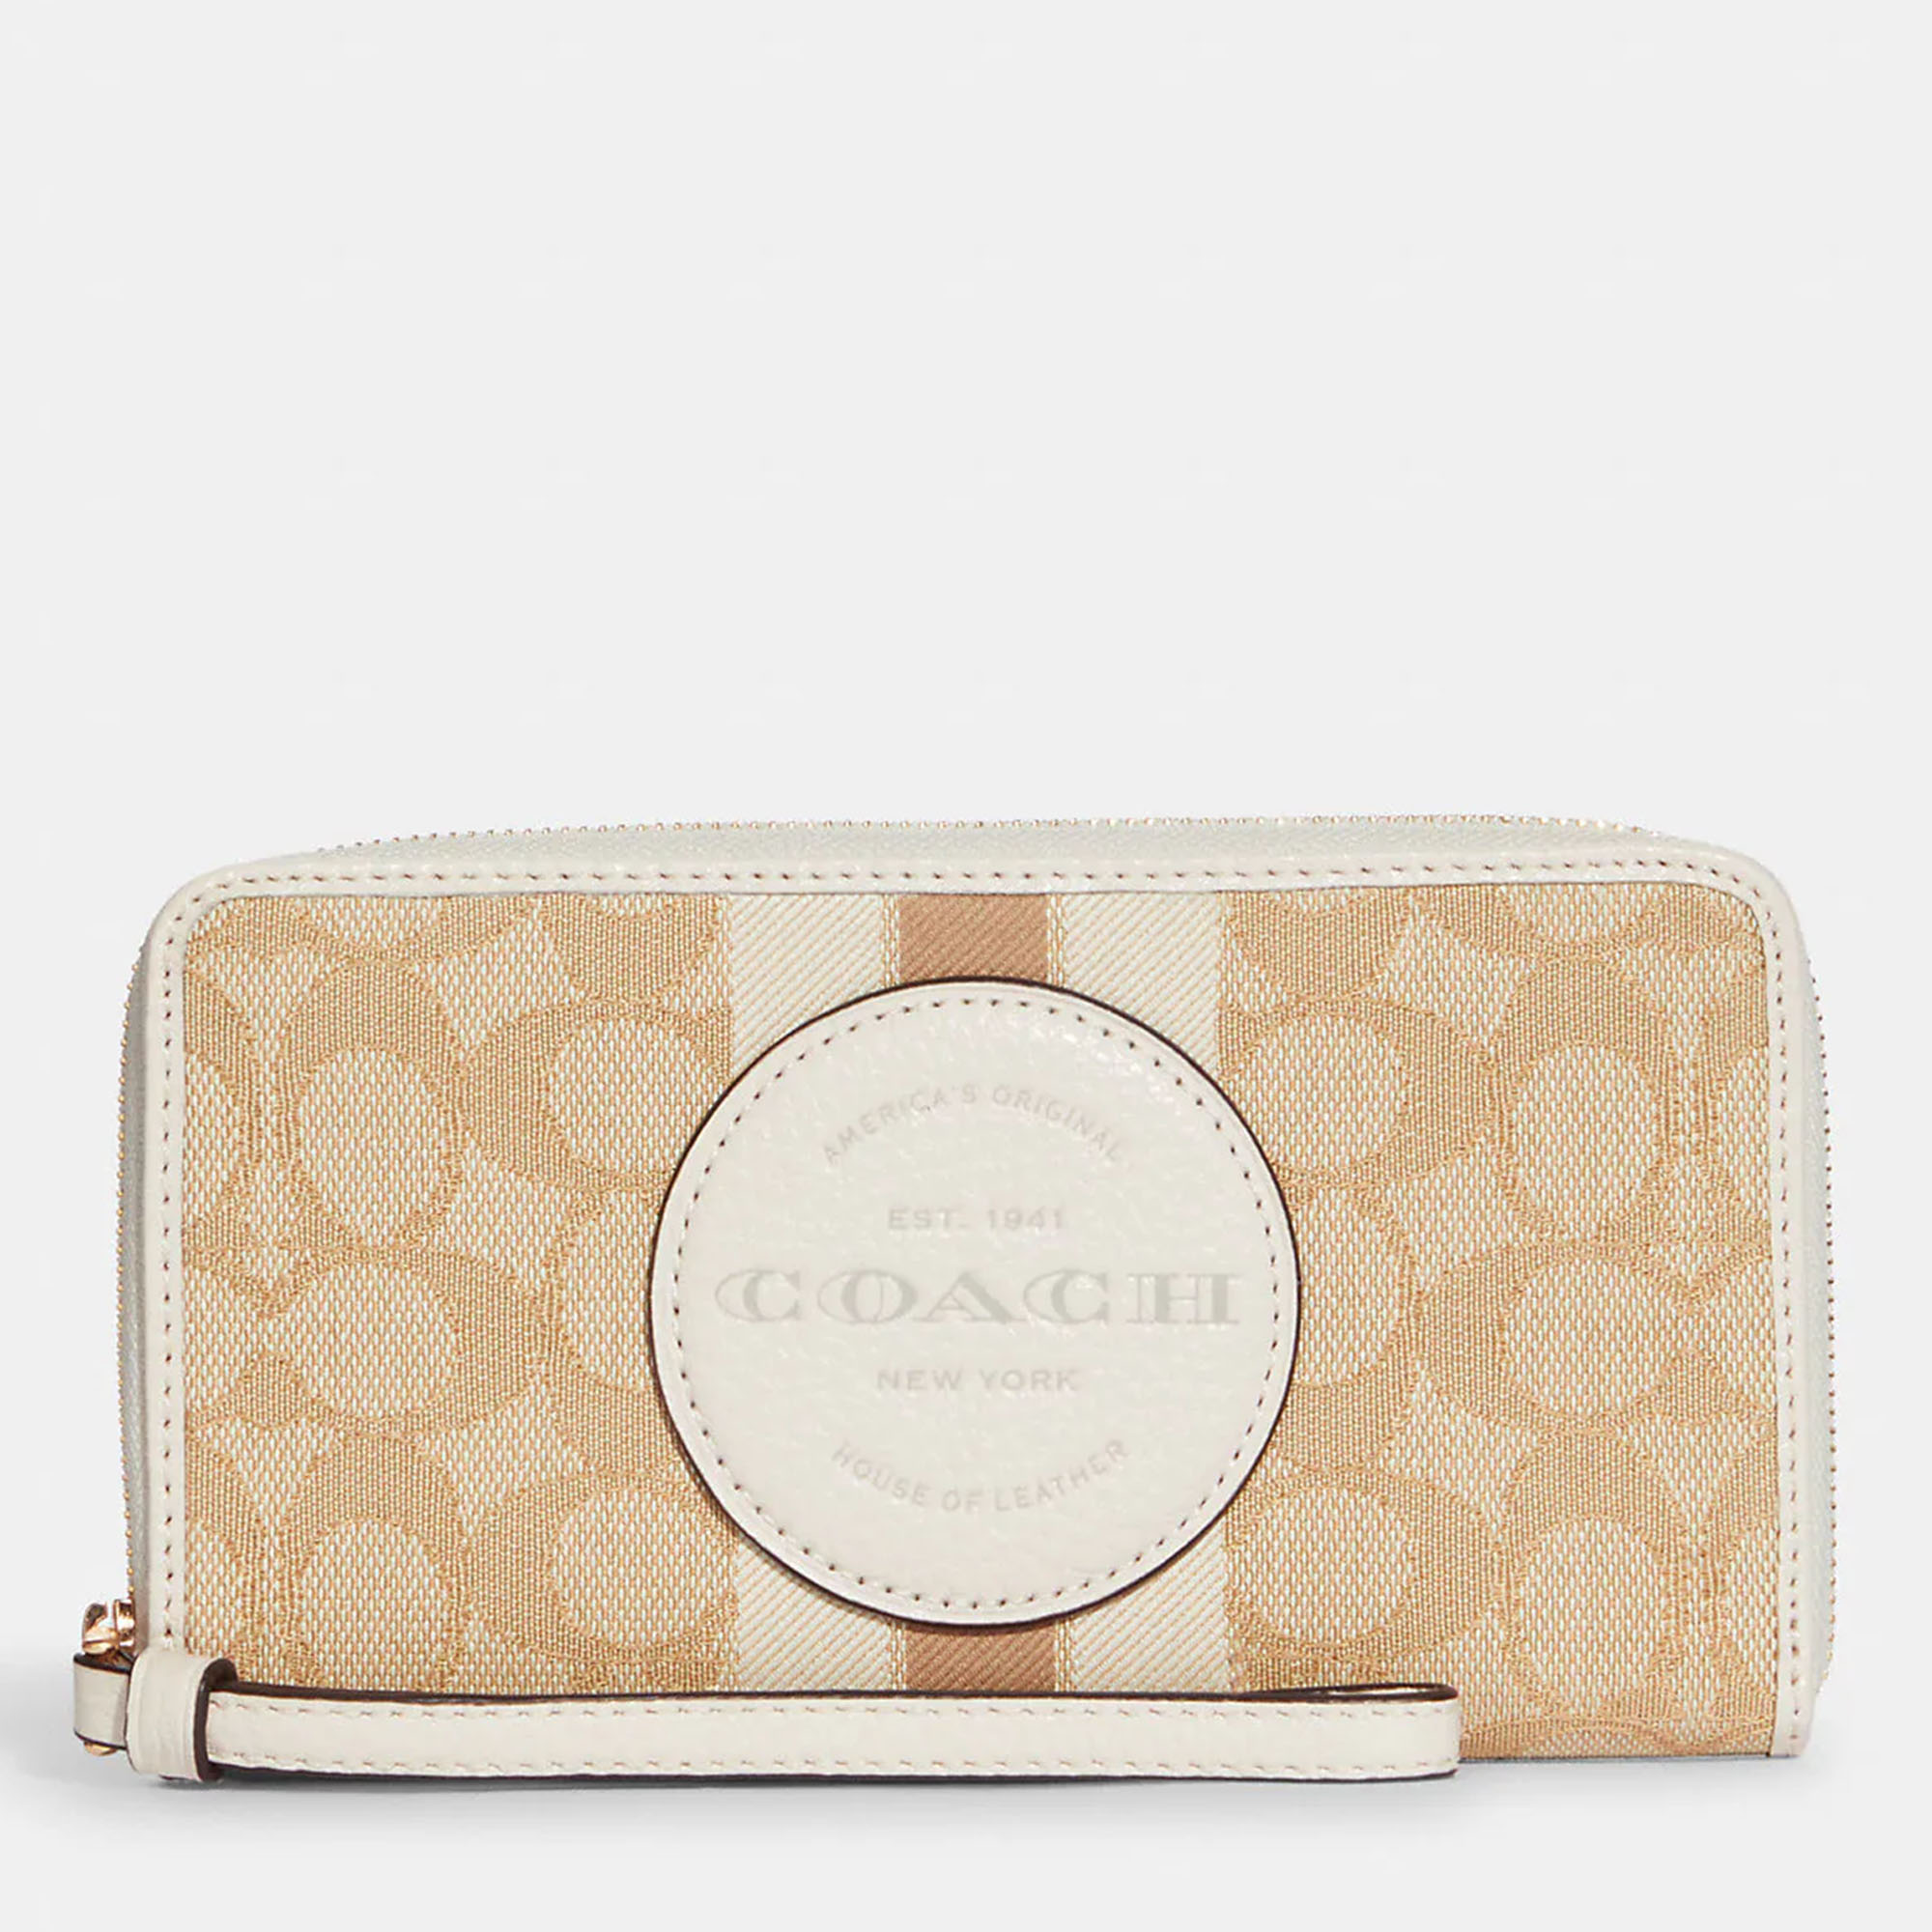 Pre-owned Coach White/beige Signature Jacquard Leather Dempsey Large Phone Wallet